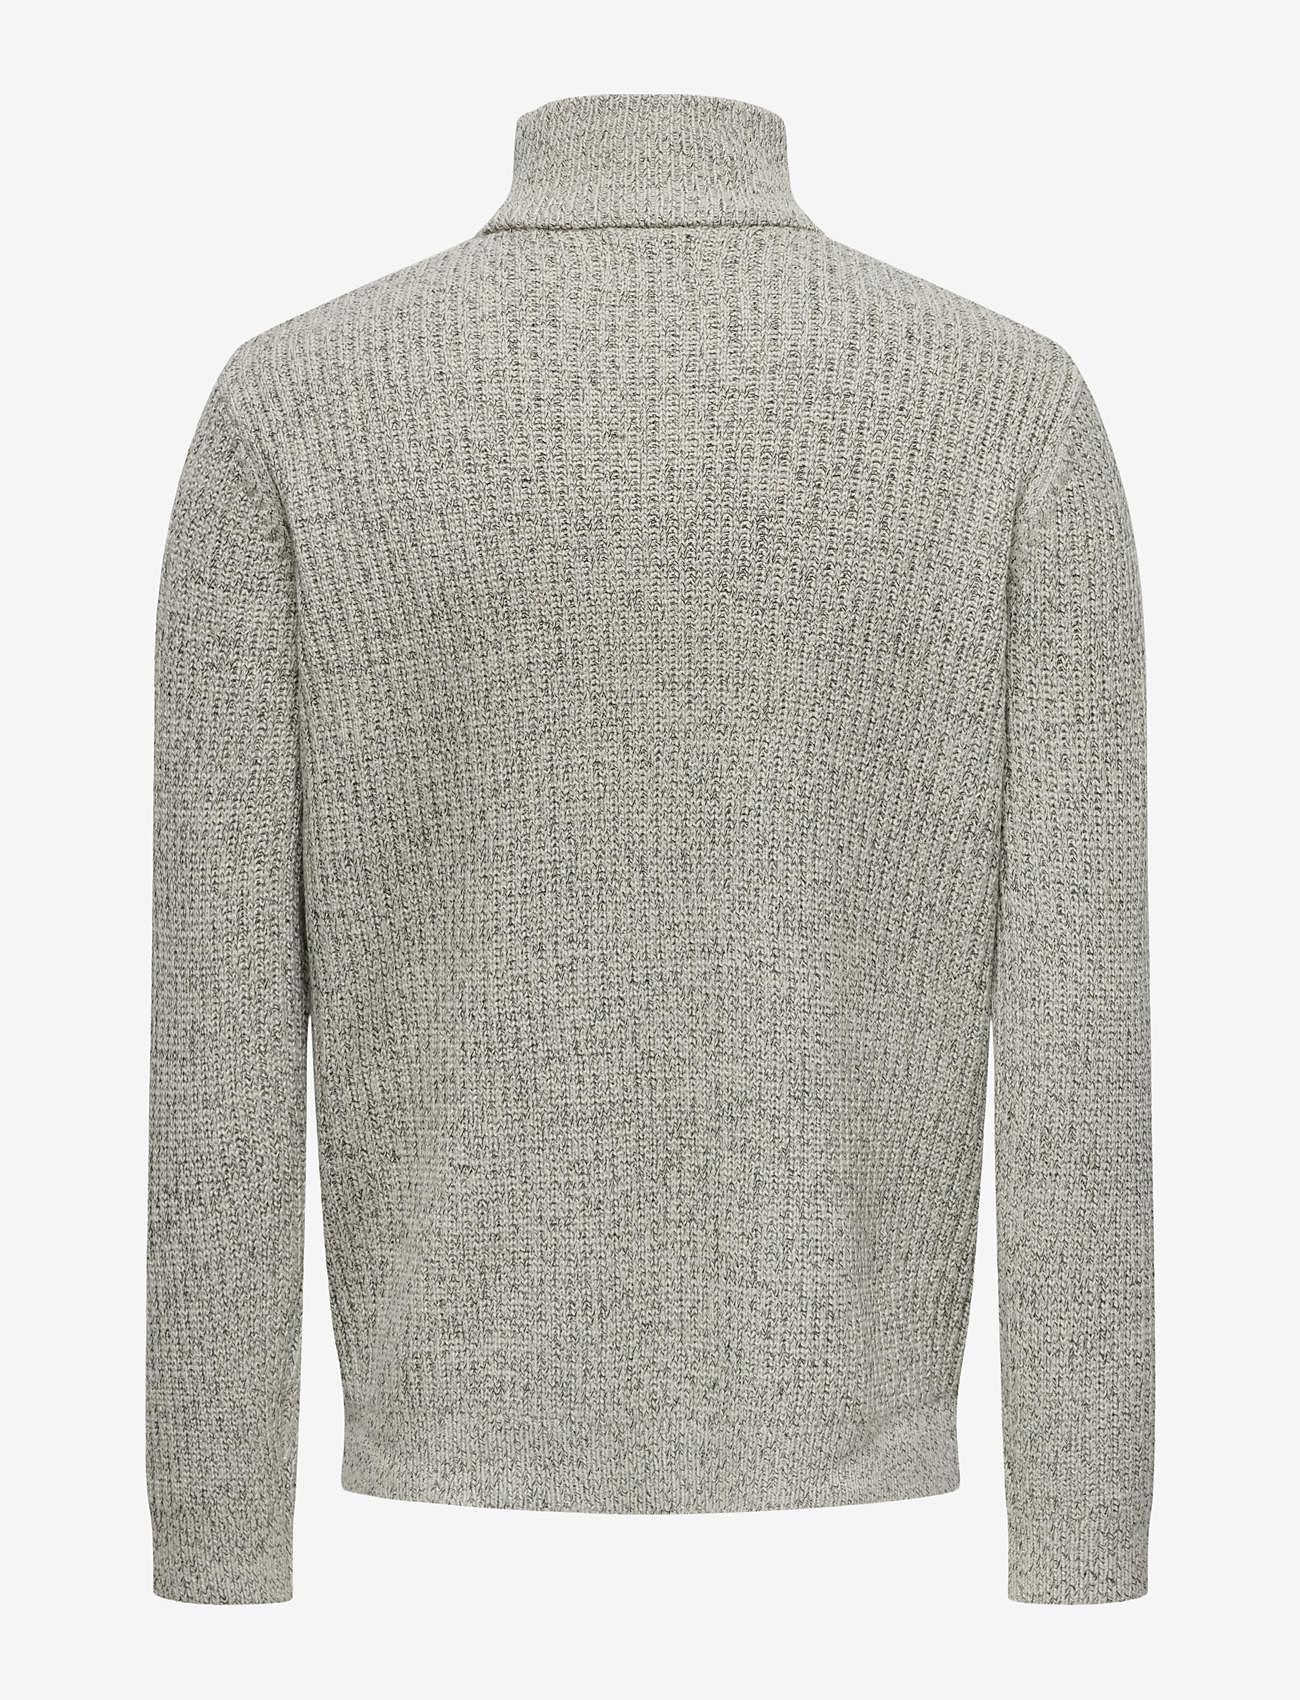 ONLY & SONS - ONSMALAKI REG 7 HIGH NECK KNIT - poolokaulus - silver lining - 1